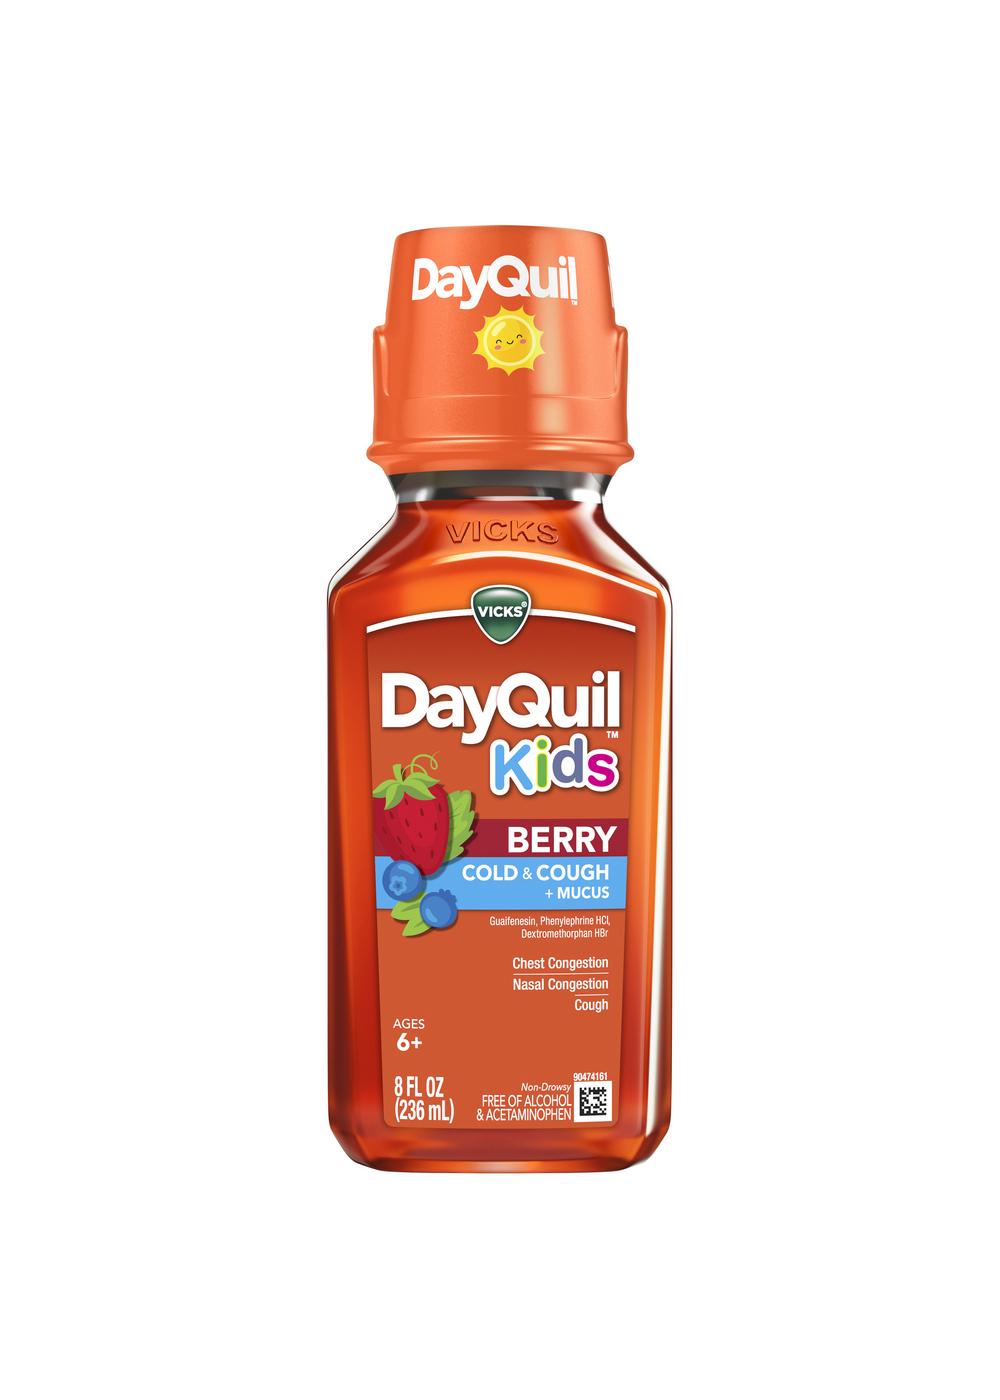 Vicks DayQuil Kids Cold & Cough + Mucus - Berry; image 1 of 3